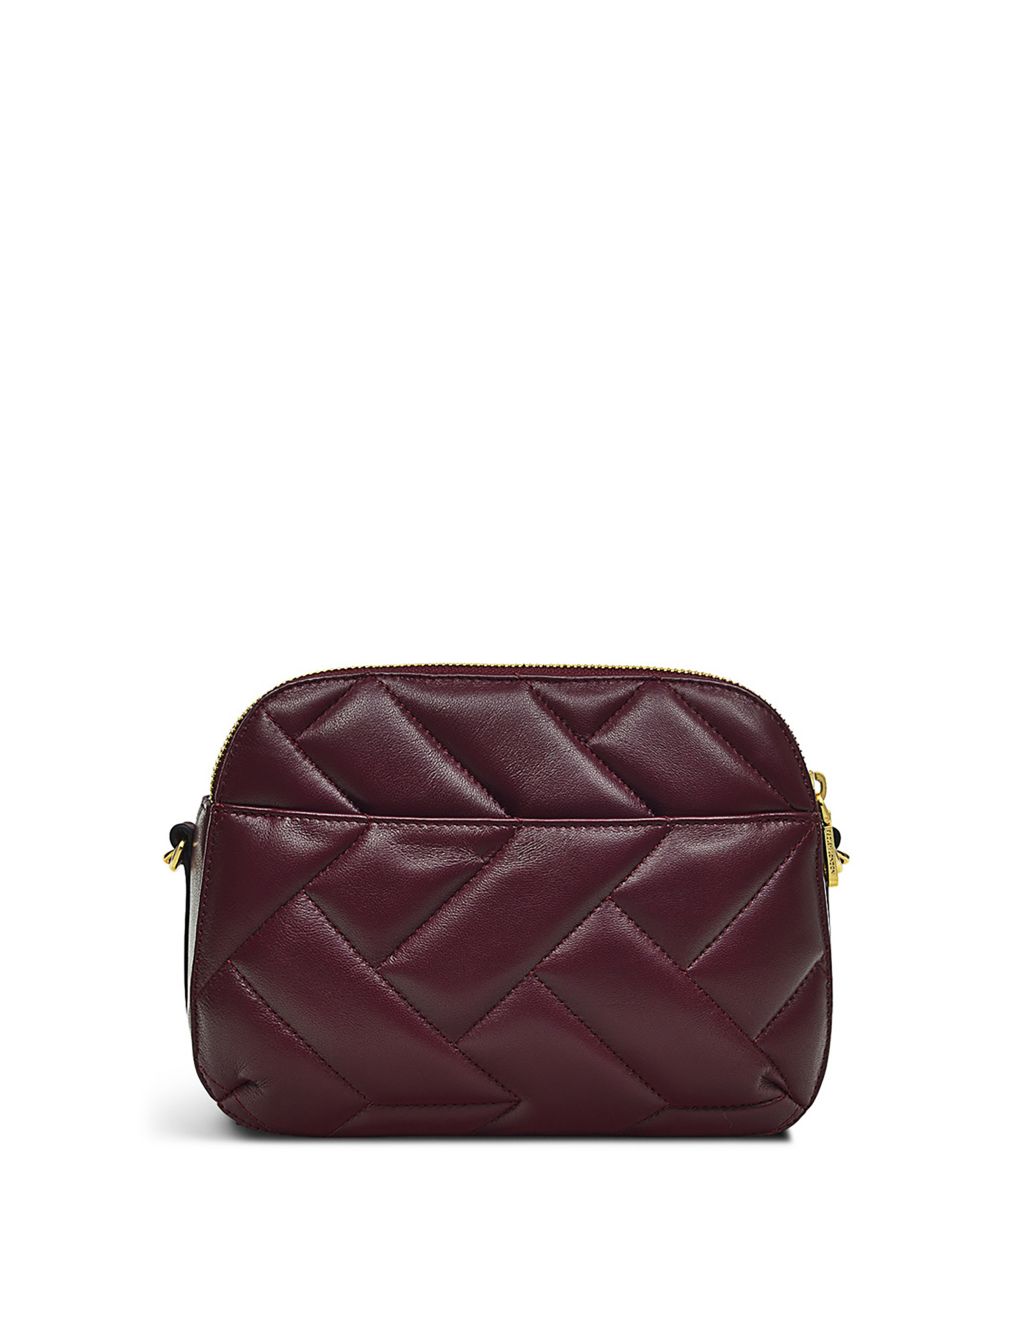 Dukes Place Leather Quilted Cross Body Bag image 2